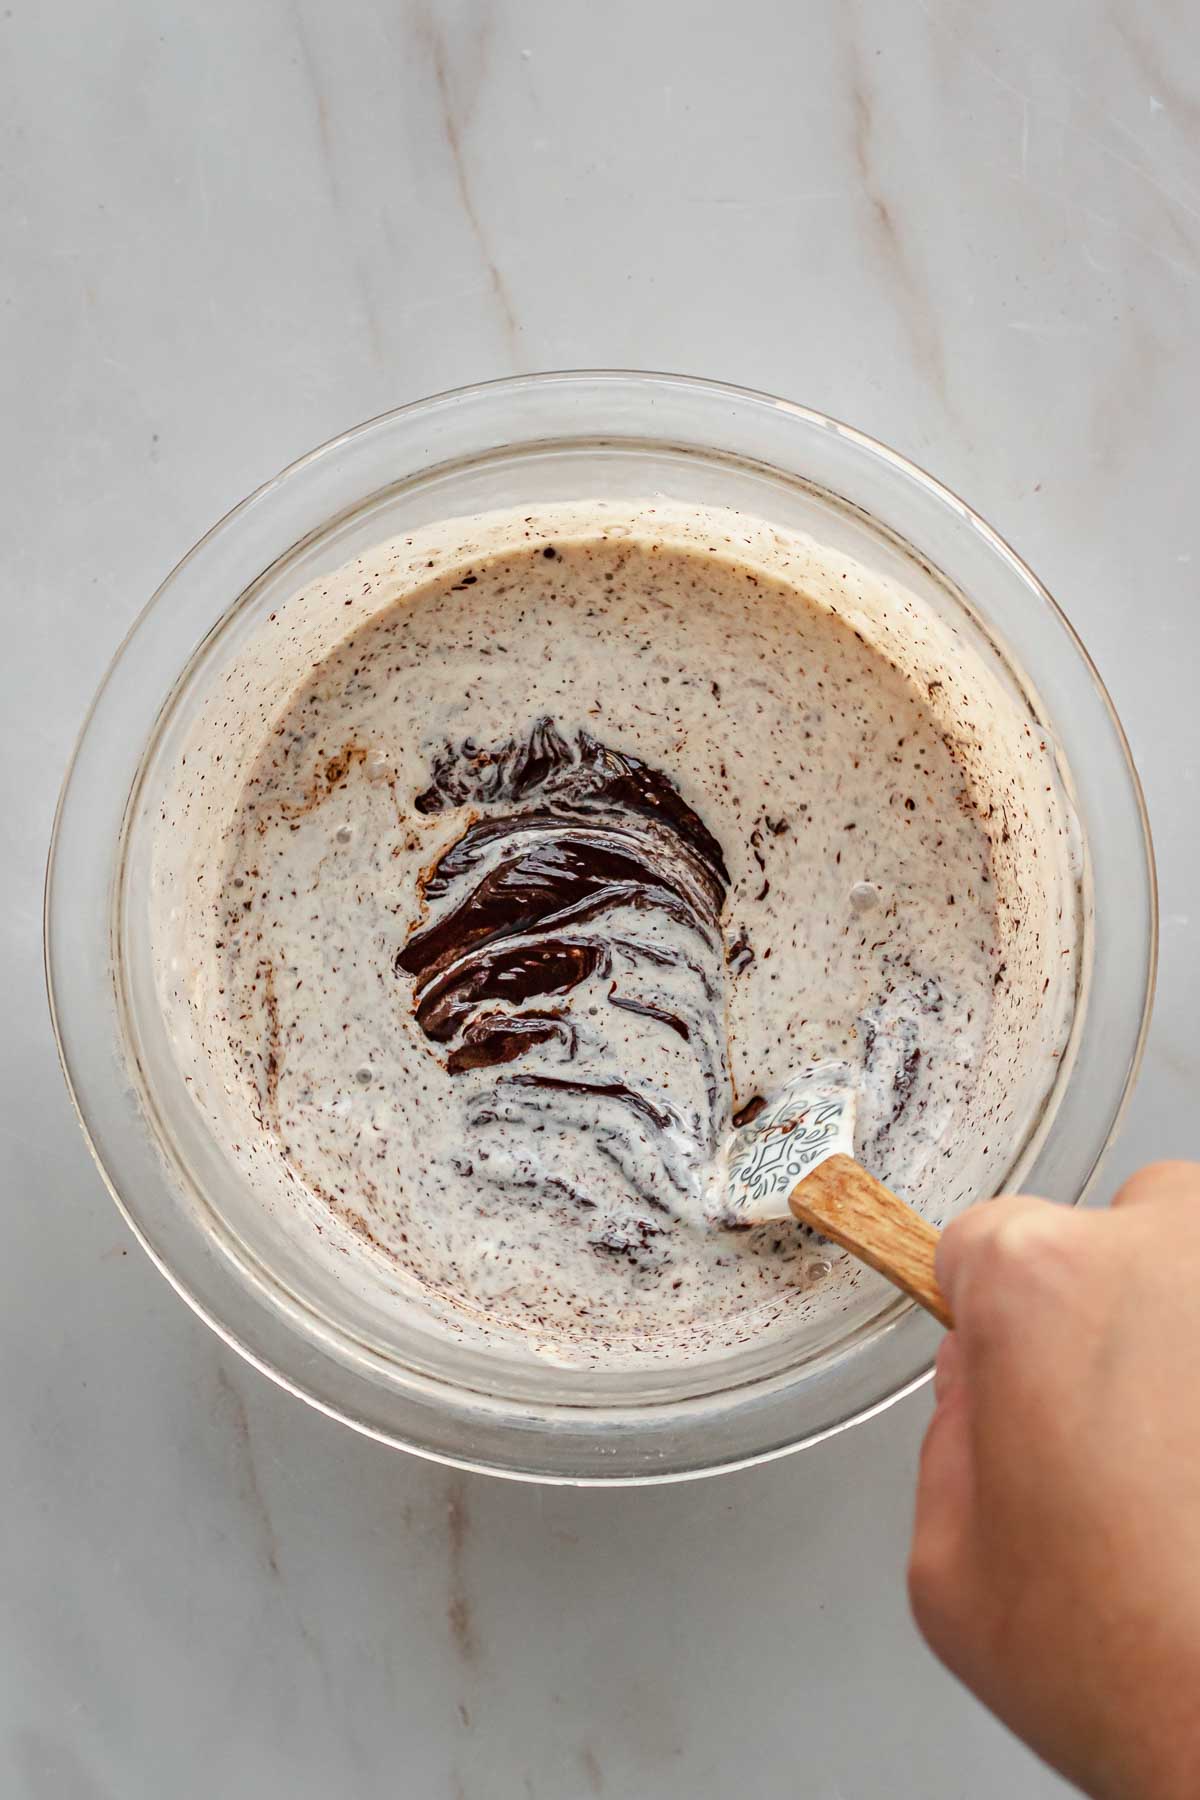 A hand stirs together chocolate and heavy cream in a bowl.